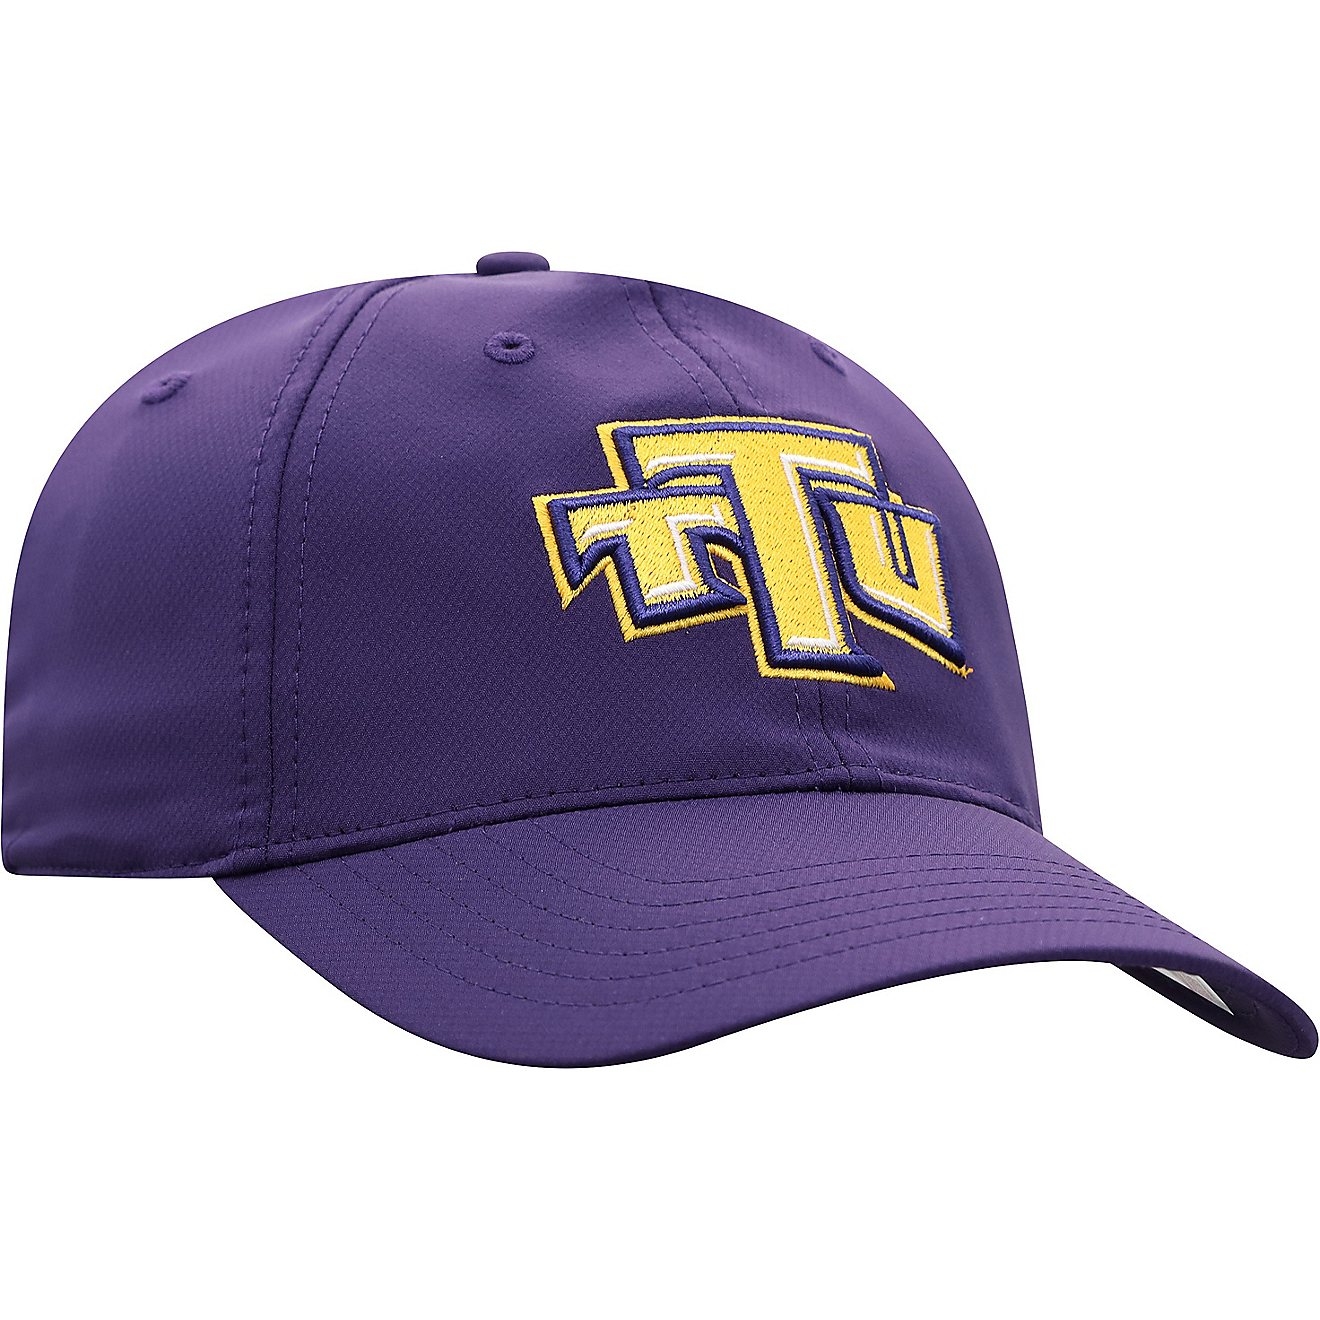 Top of the World Adults' Tennessee Tech University Trainer 20 Adjustable Team Color Cap                                          - view number 4